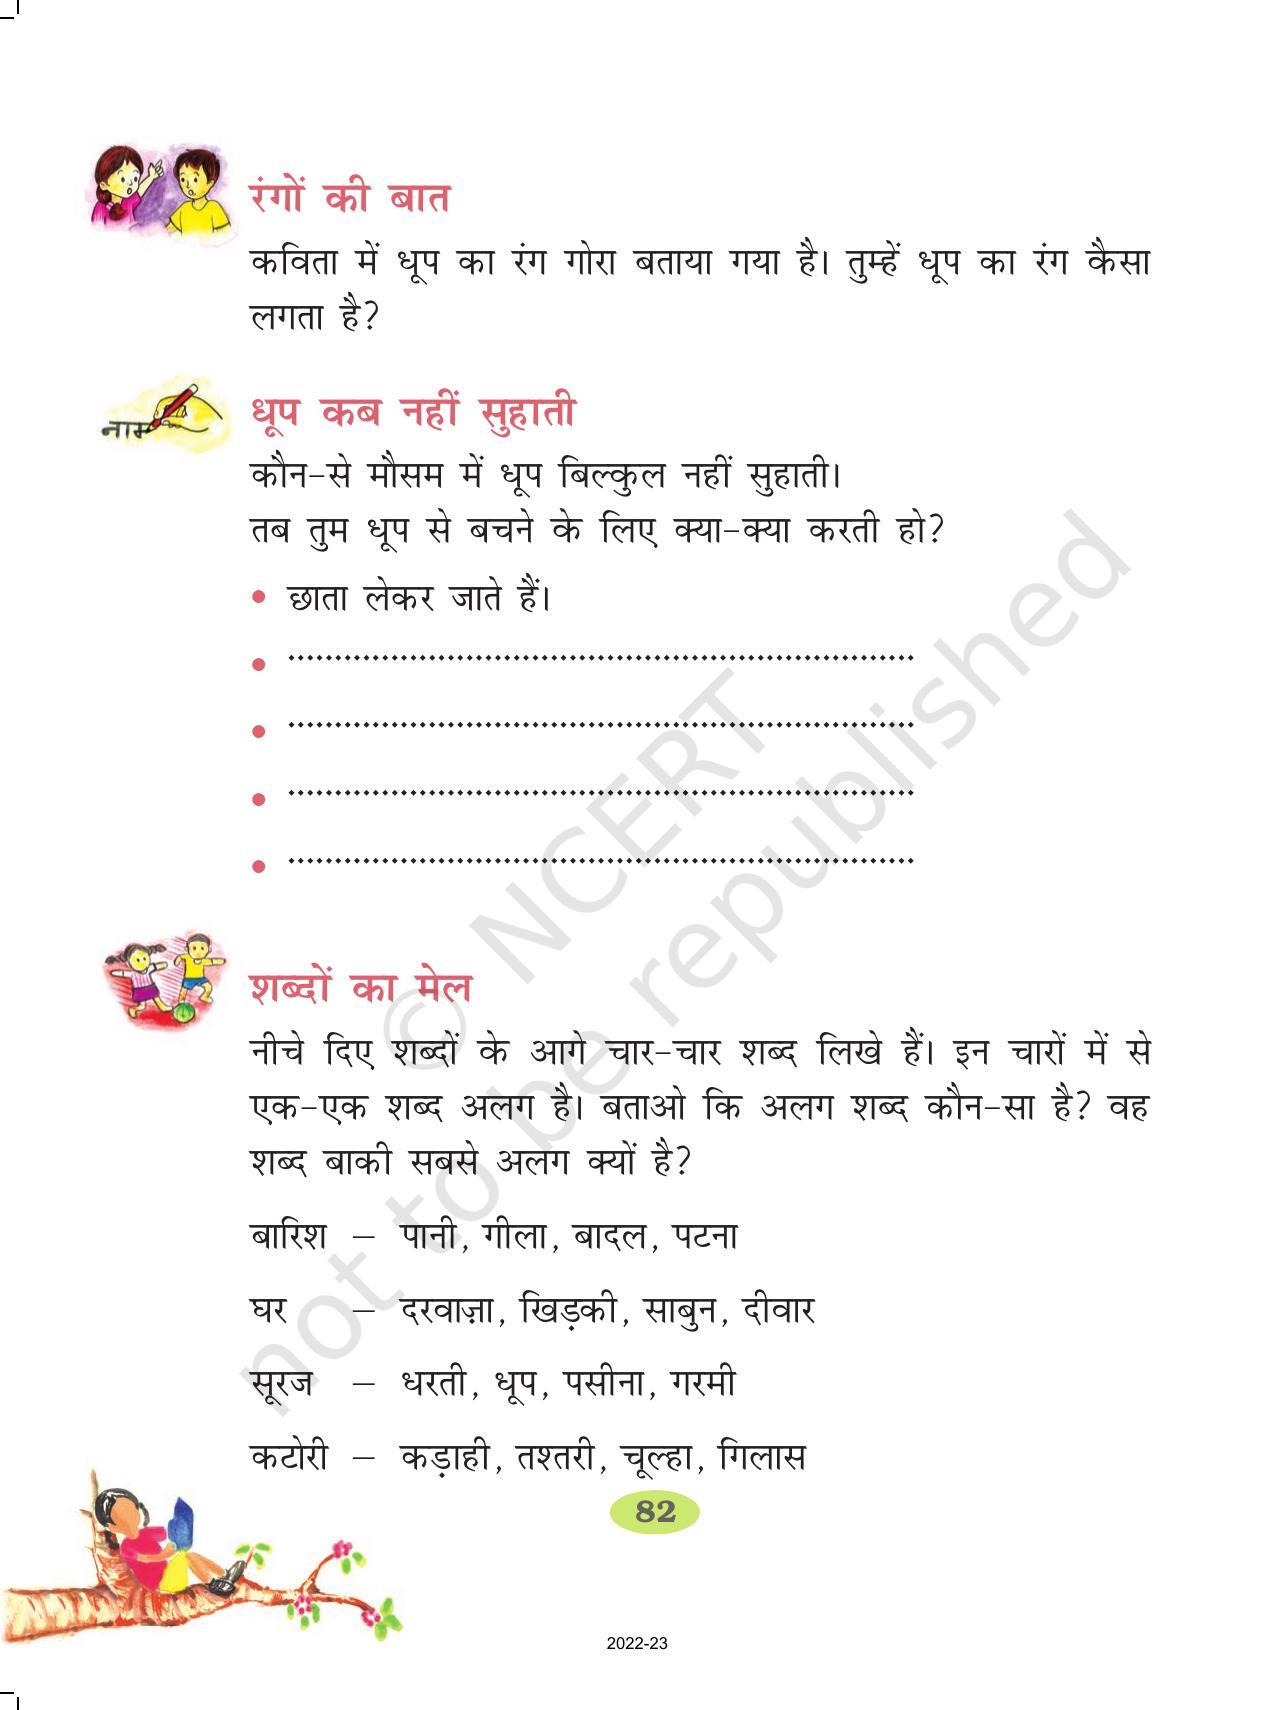 NCERT Book for Class 2 Hindi :Chapter 13-सूरज जल्दी आना जी - Page 2